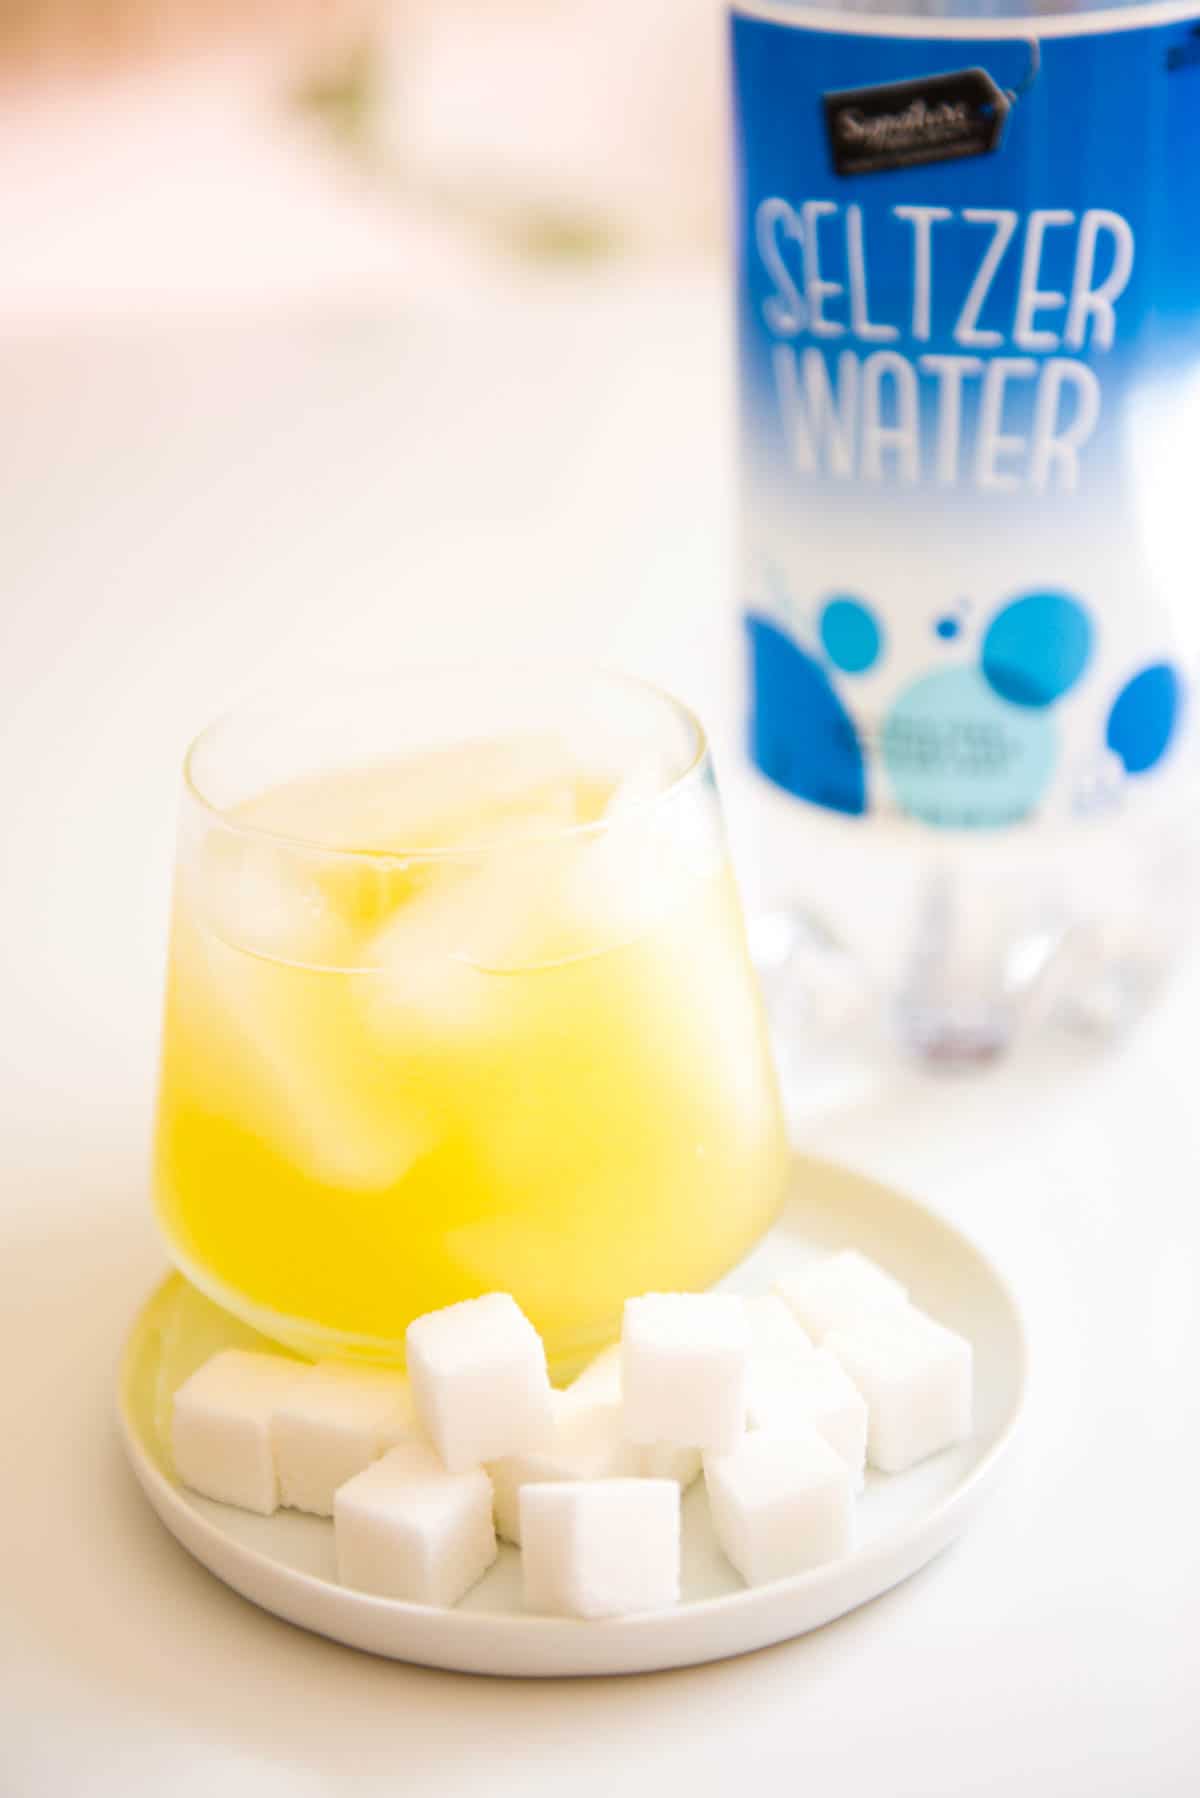 Close up of a glass holding a yellow cocktail next to sugar cubes on a plate next to a bottle of club soda.